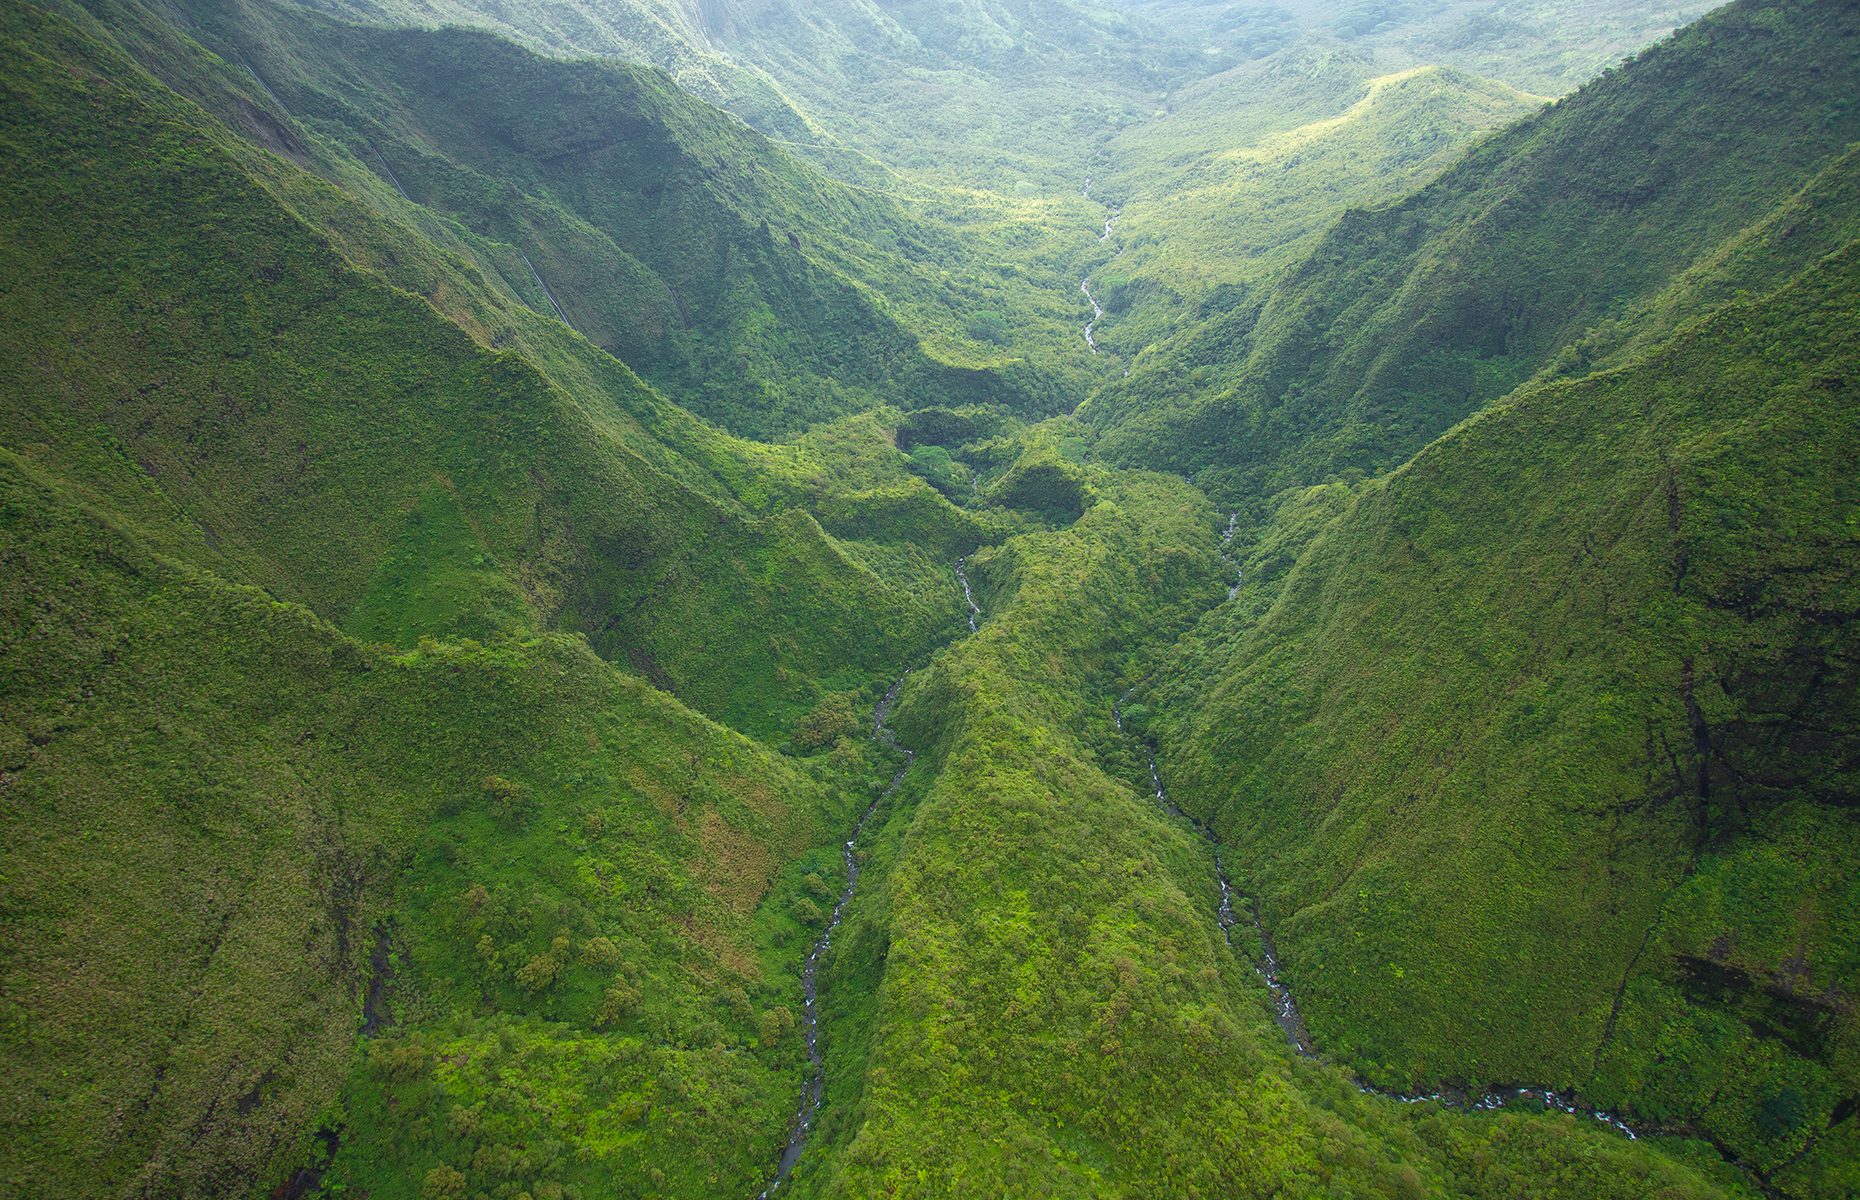 <p>The second-highest point on the island of Kauaʻi, <a href="https://kukuiula.com/mount-waialeale/" rel="noreferrer noopener">Mount Waialeale</a> also holds the distinction of being the second-wettest place on earth. This harsh terrain and unrelenting bad weather are what make it one of the wildest places in the state.</p>